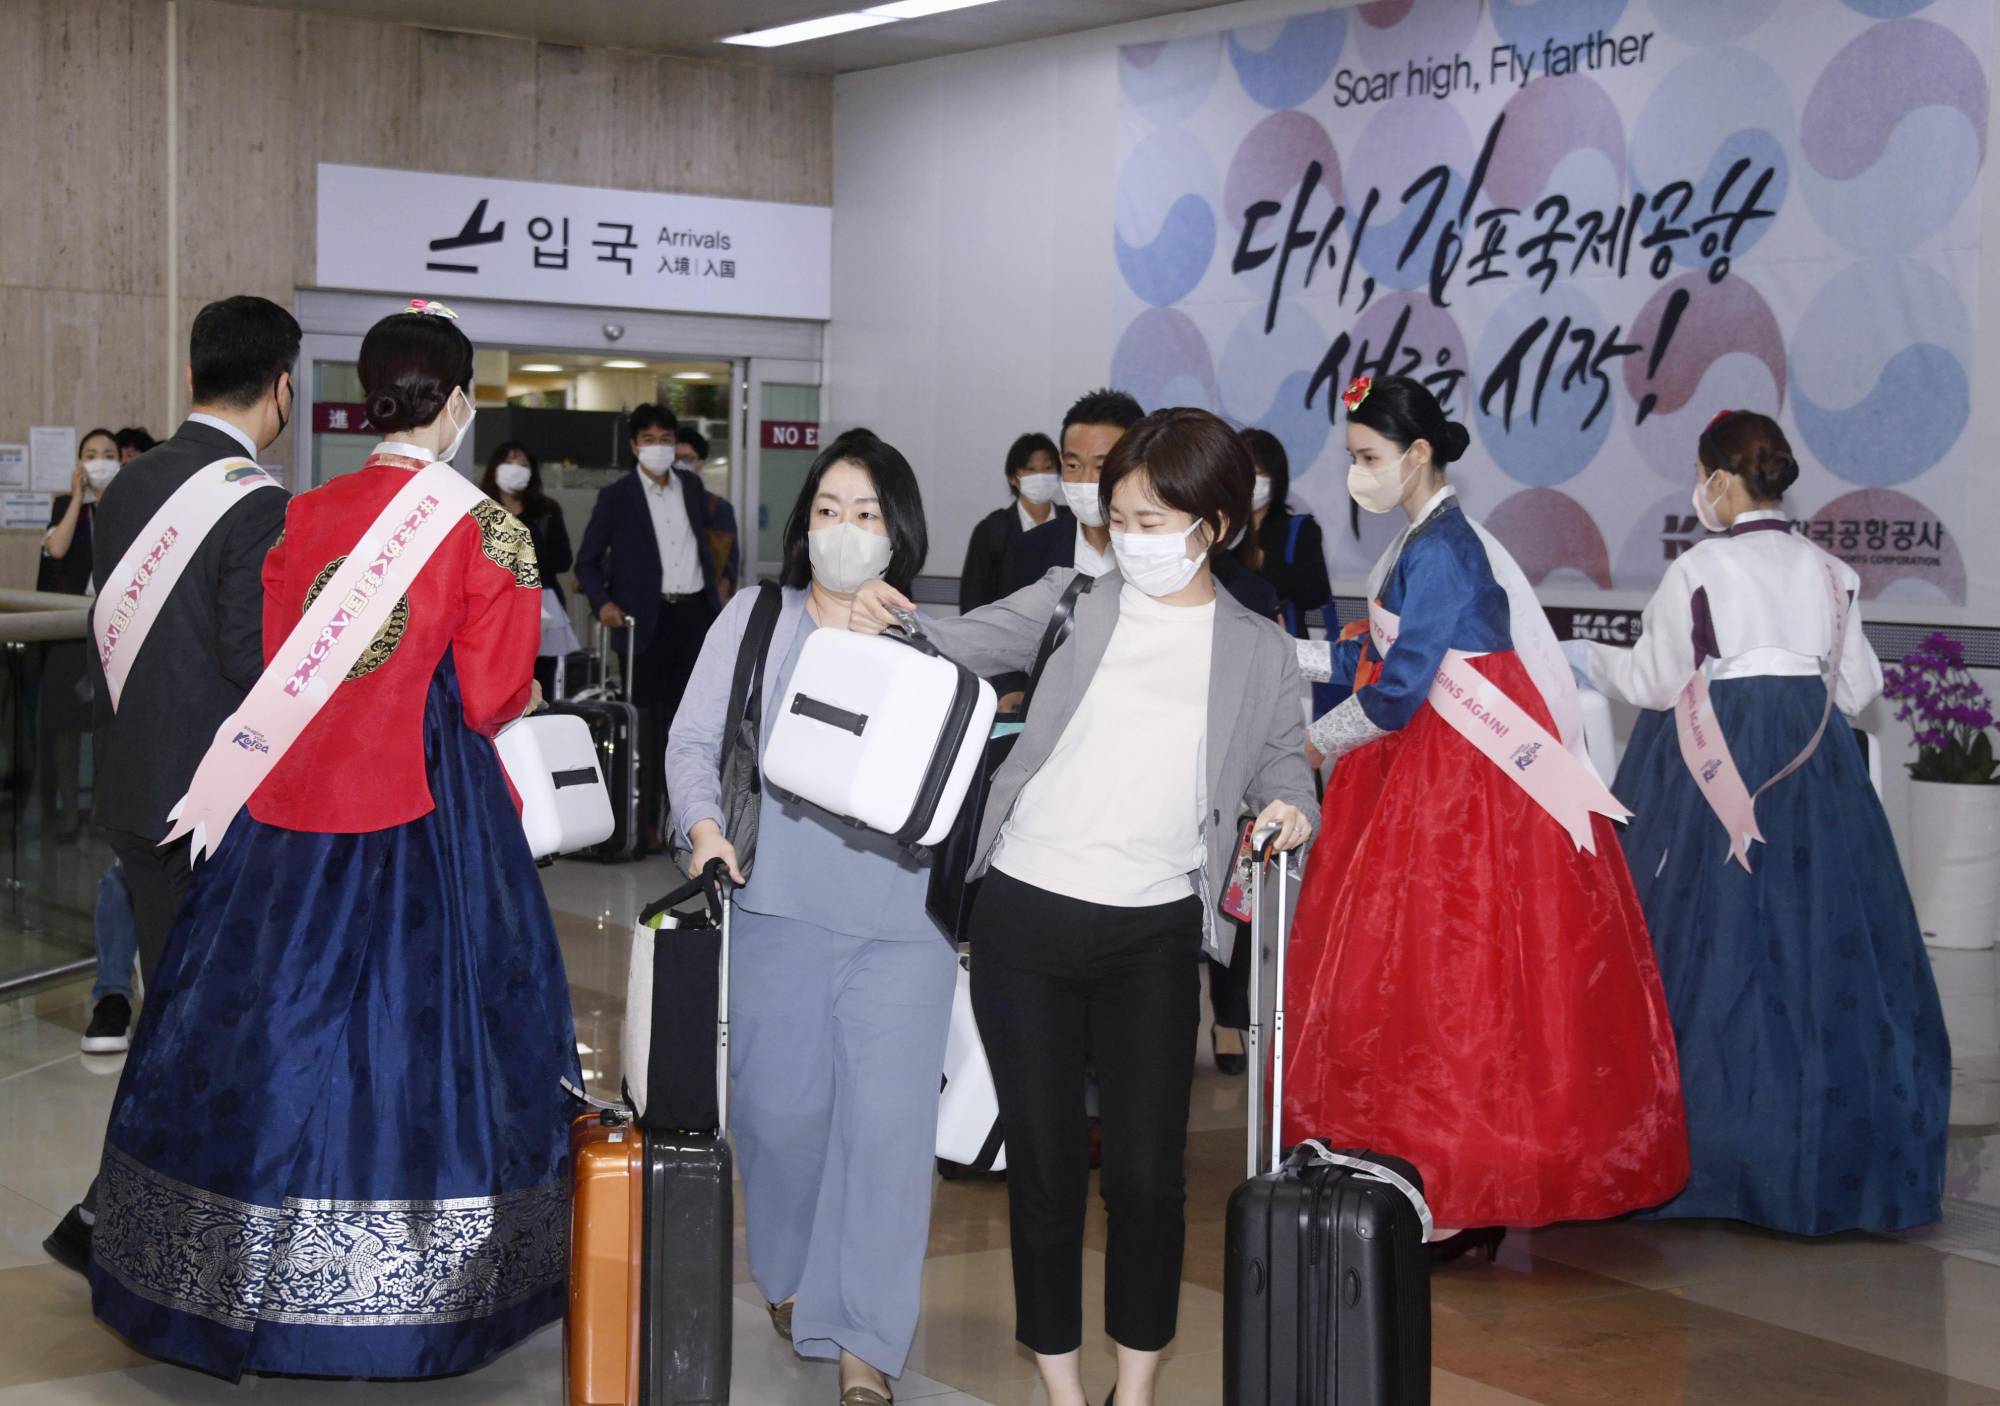 Passengers are welcomed at Seoul's Gimpo Airport after arriving via a freshly resumed flight from Haneda Airport in Tokyo on Wednesday. | KYODO